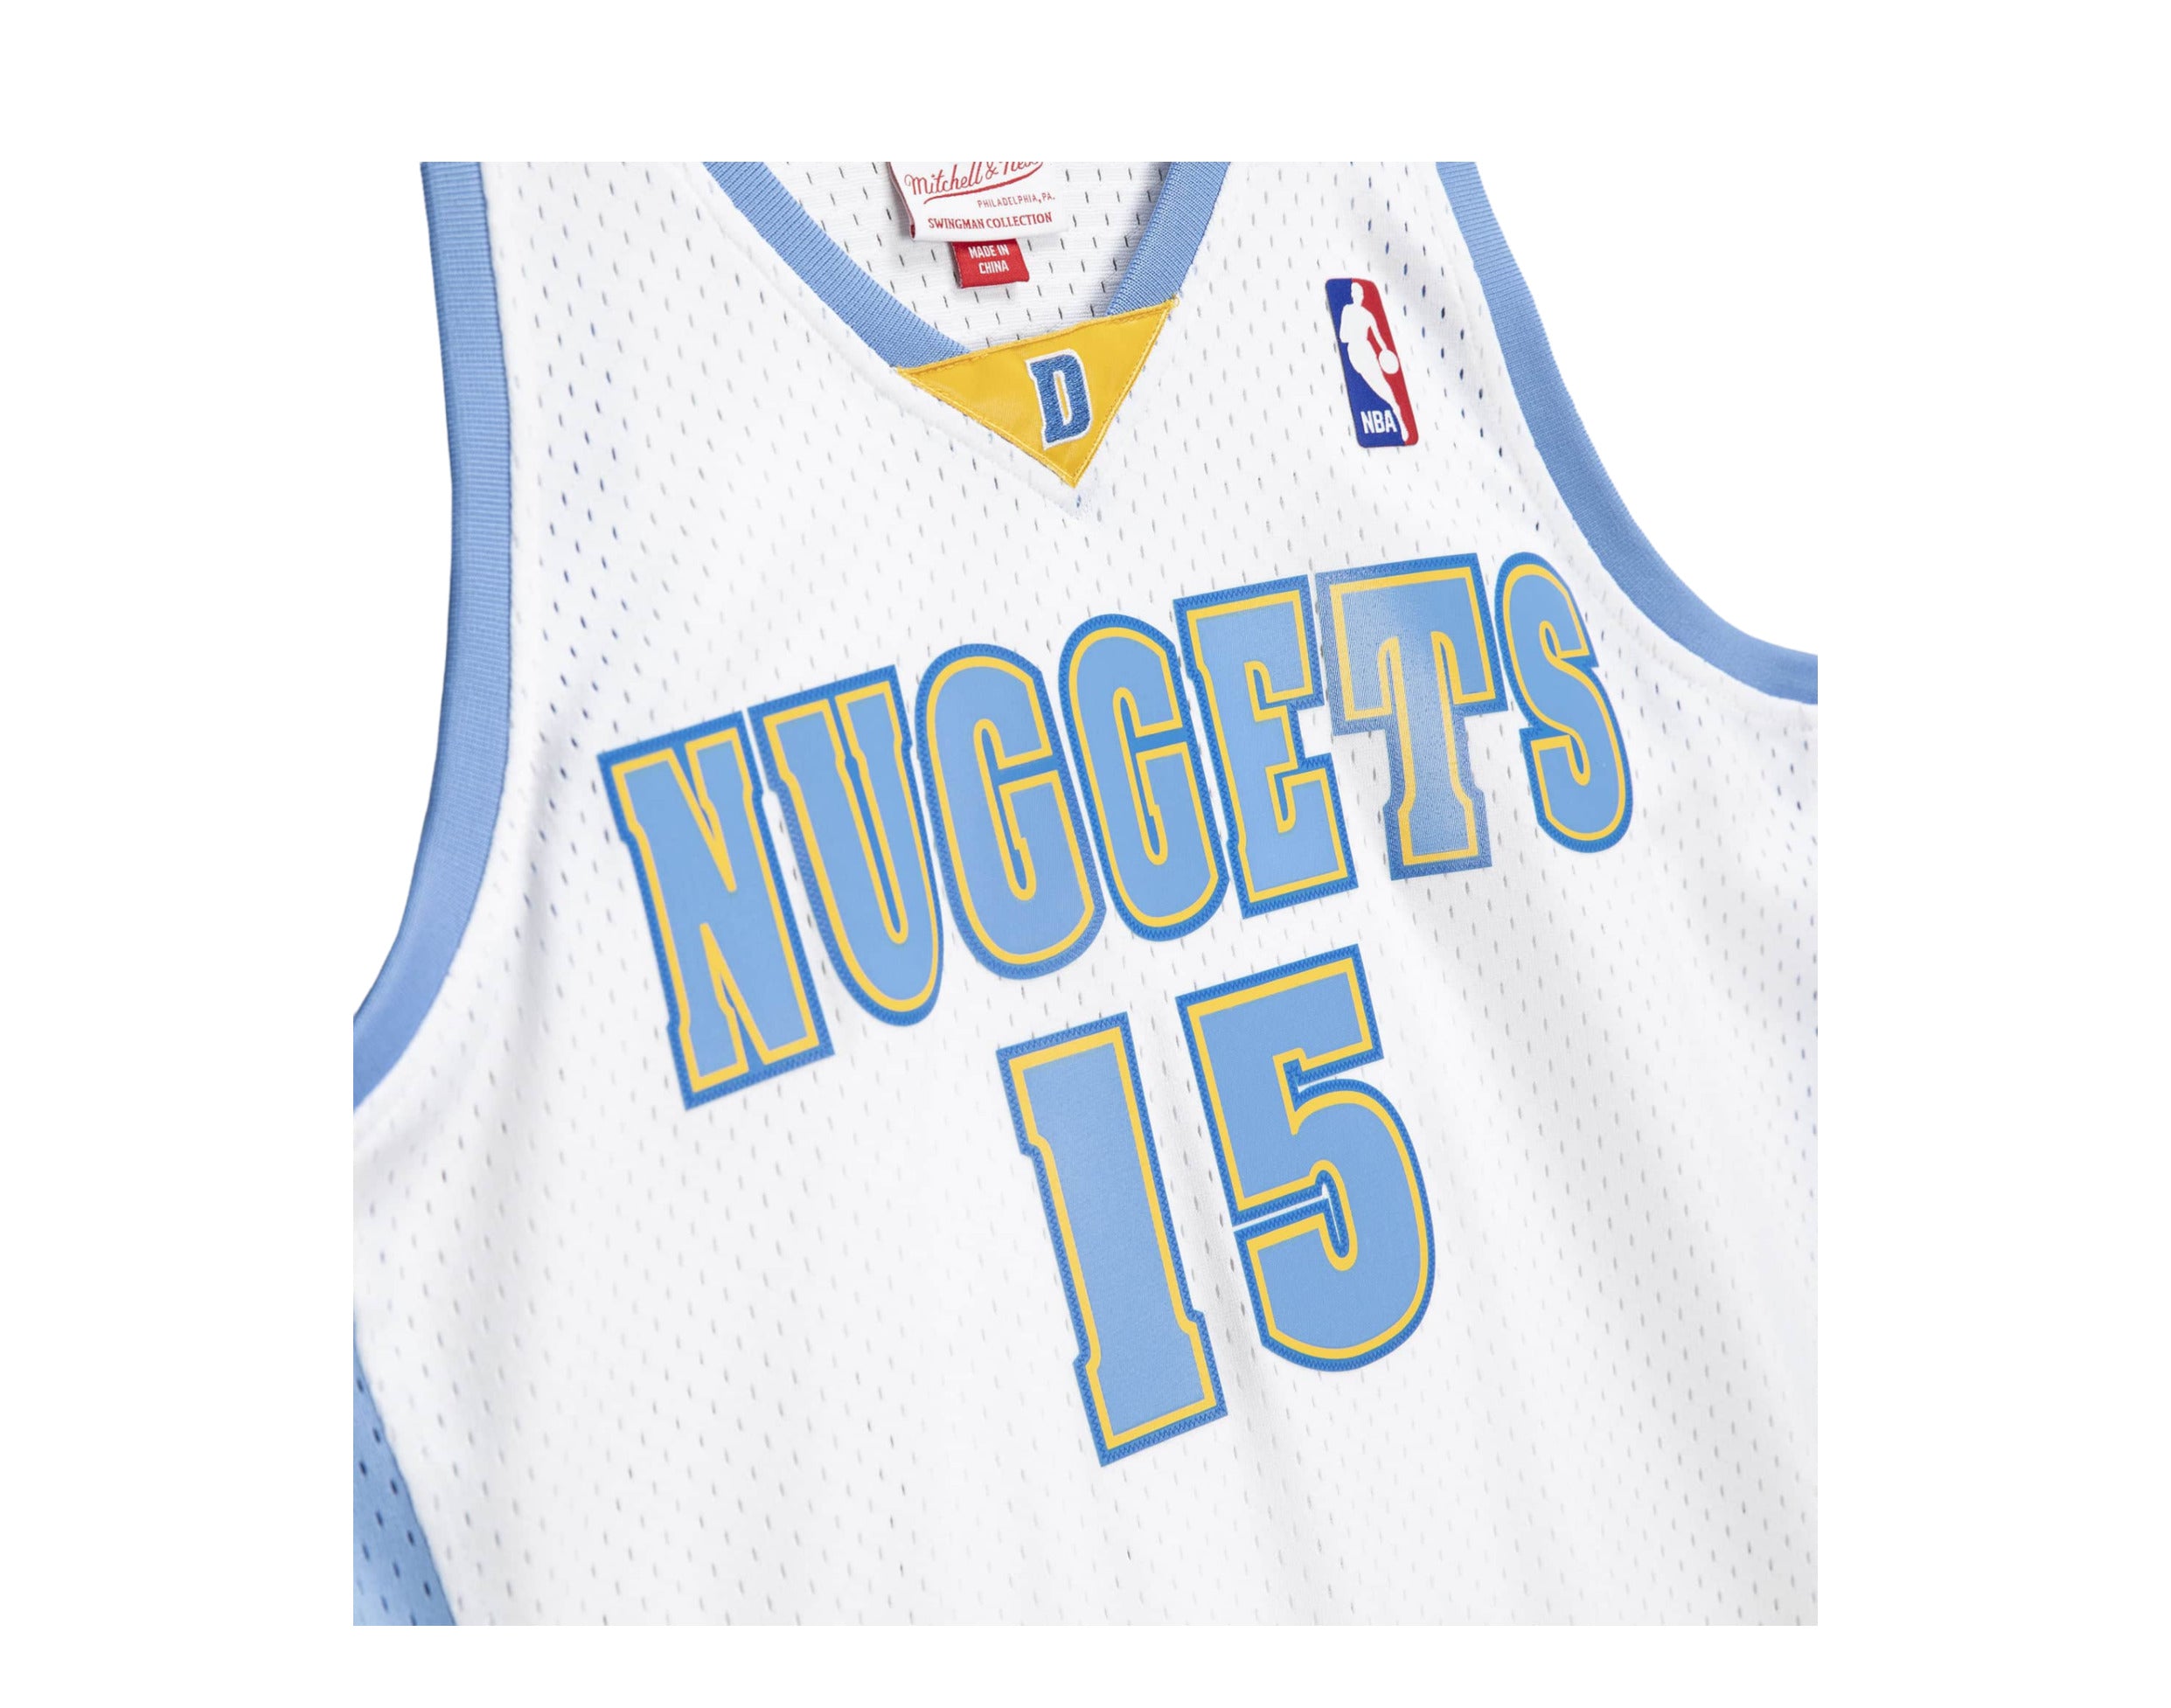 Carmelo Anthony Denver Nuggets White Jersey